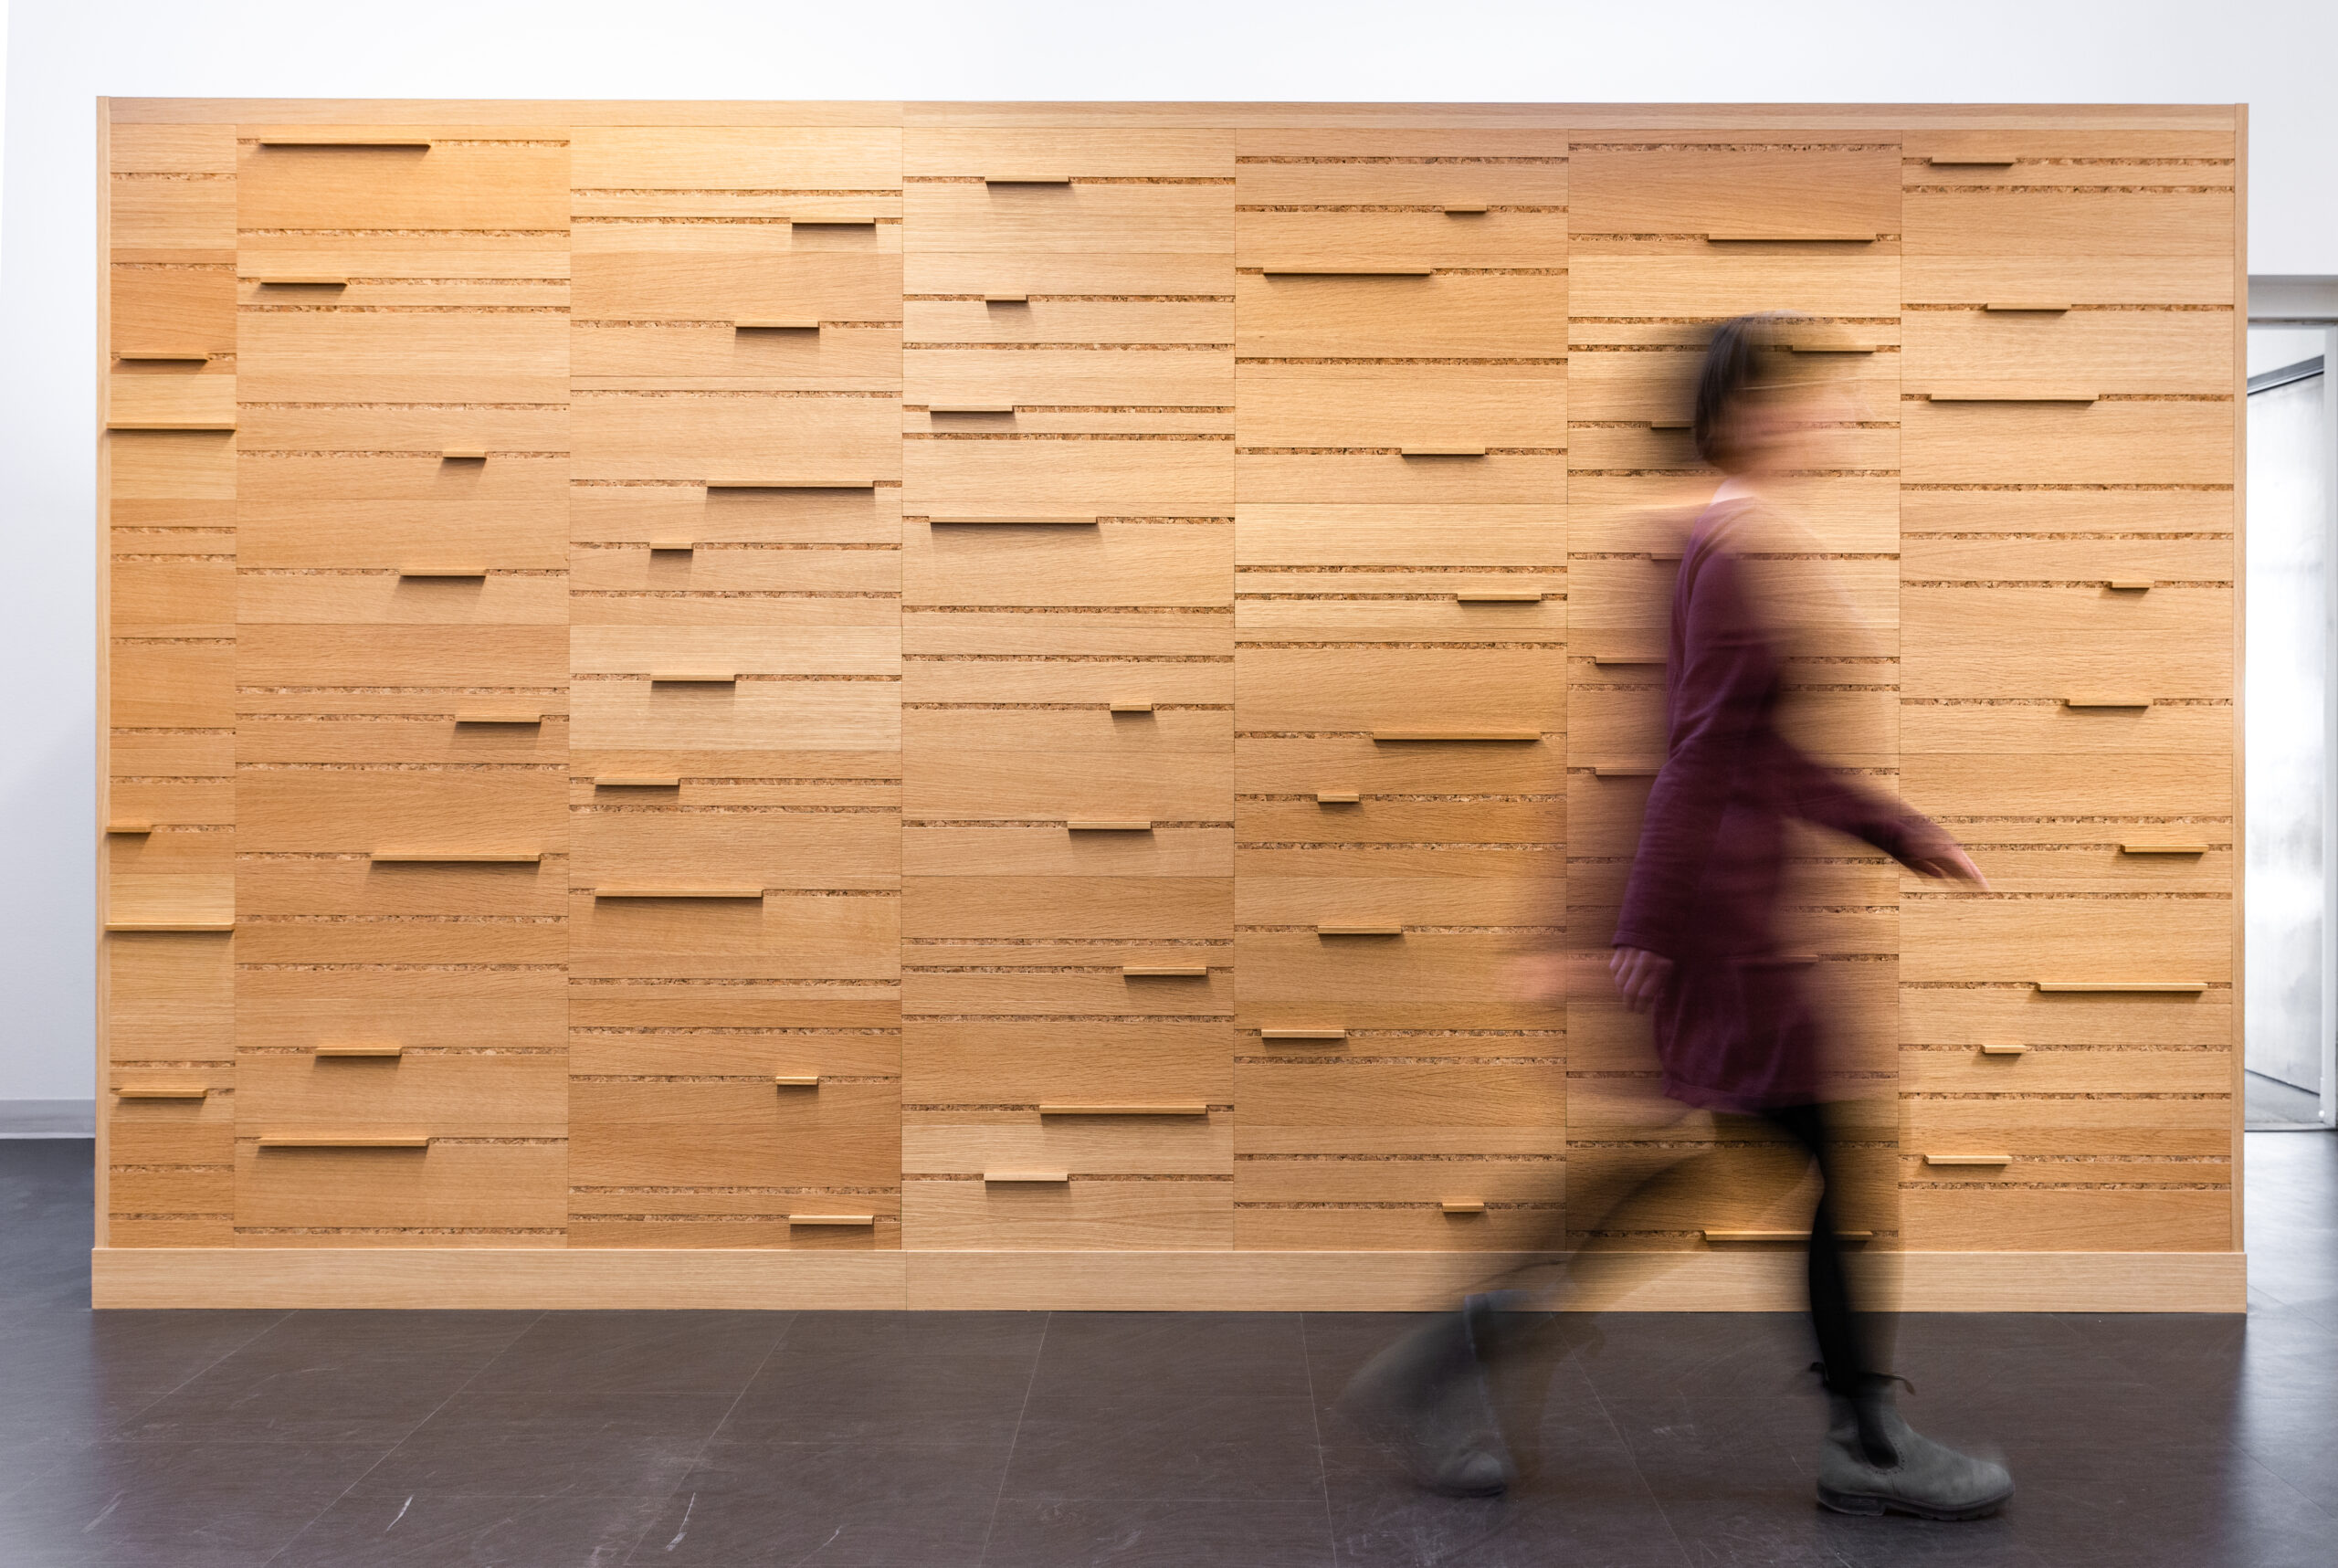 A blurry figure walks past an oak wood wall with horizontal cork lines and wooden bars set into the wall.